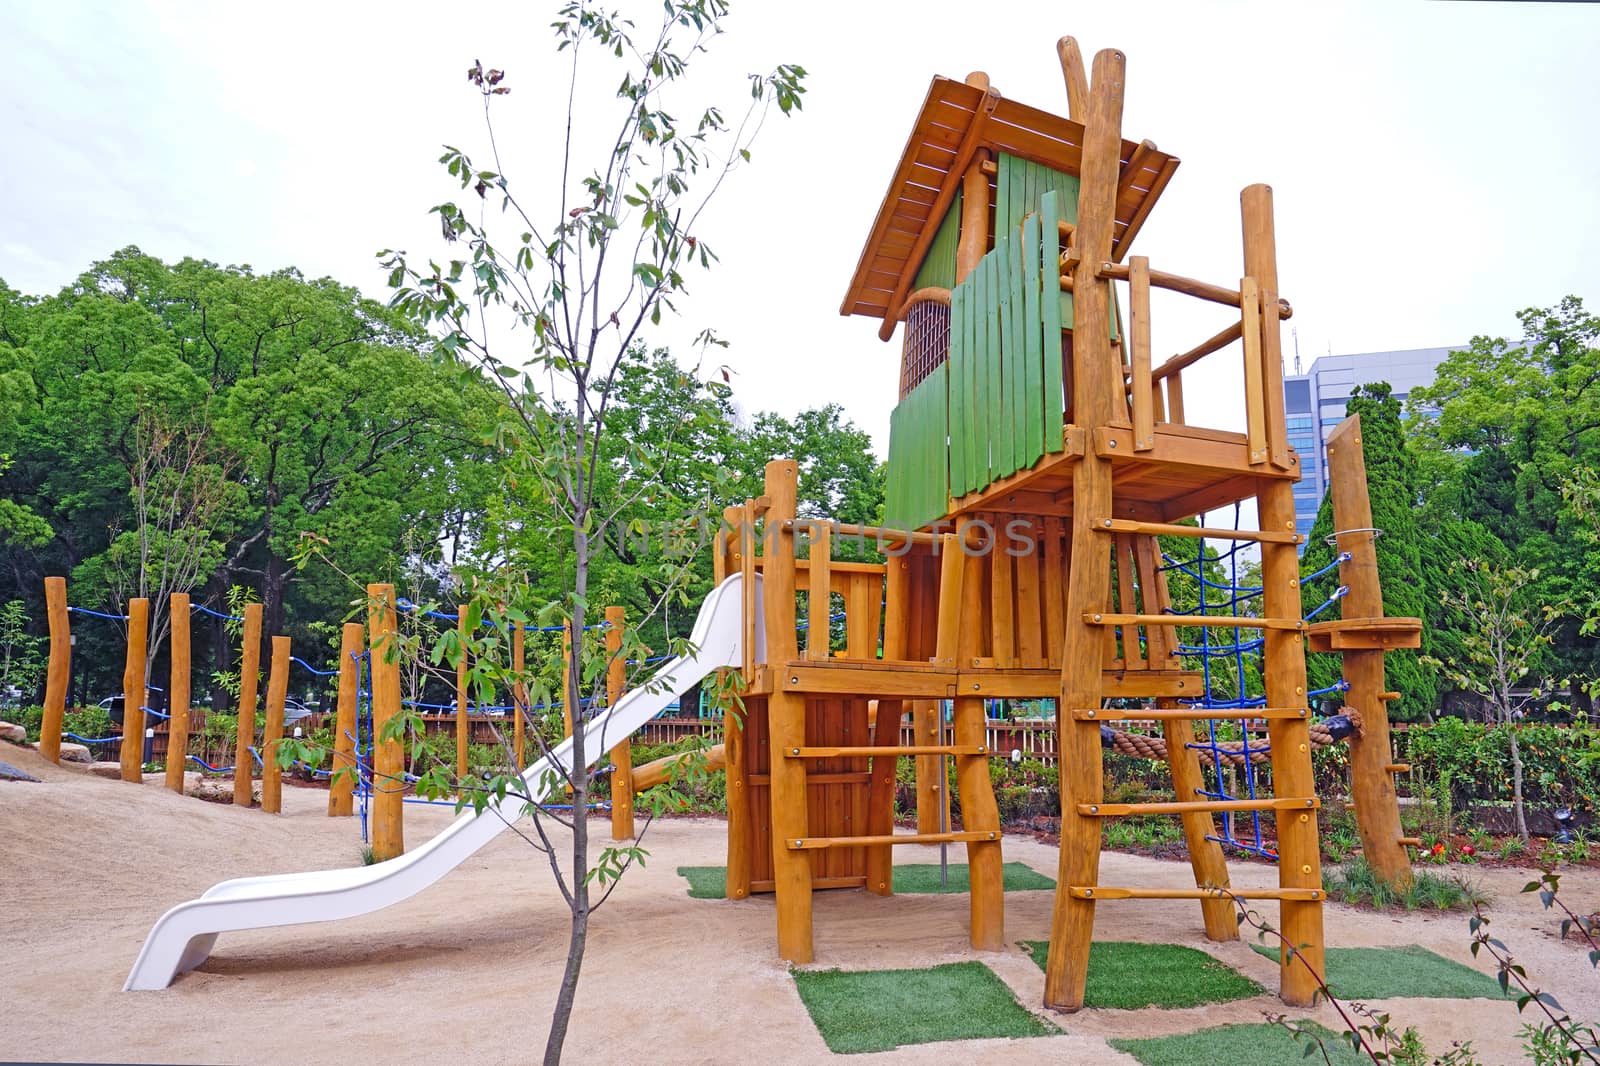 The colorful children slide equipment in Japan outdoor playround